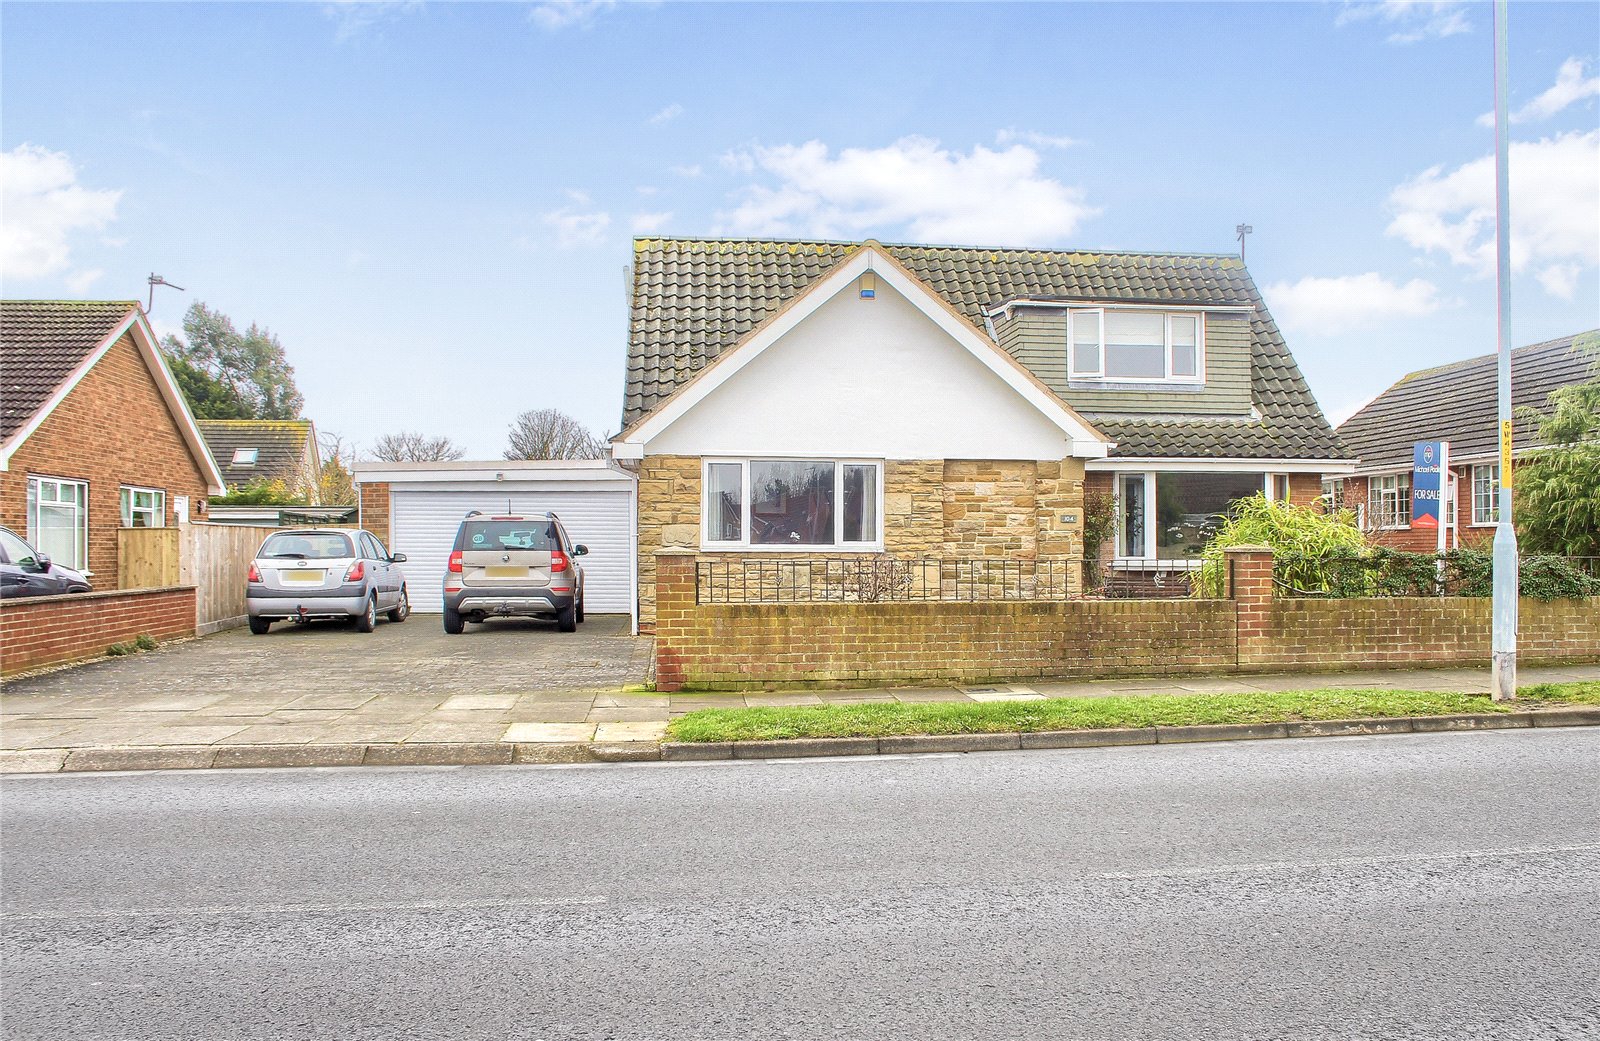 4 bed bungalow for sale in Wolviston Court, Billingham - Property Image 1